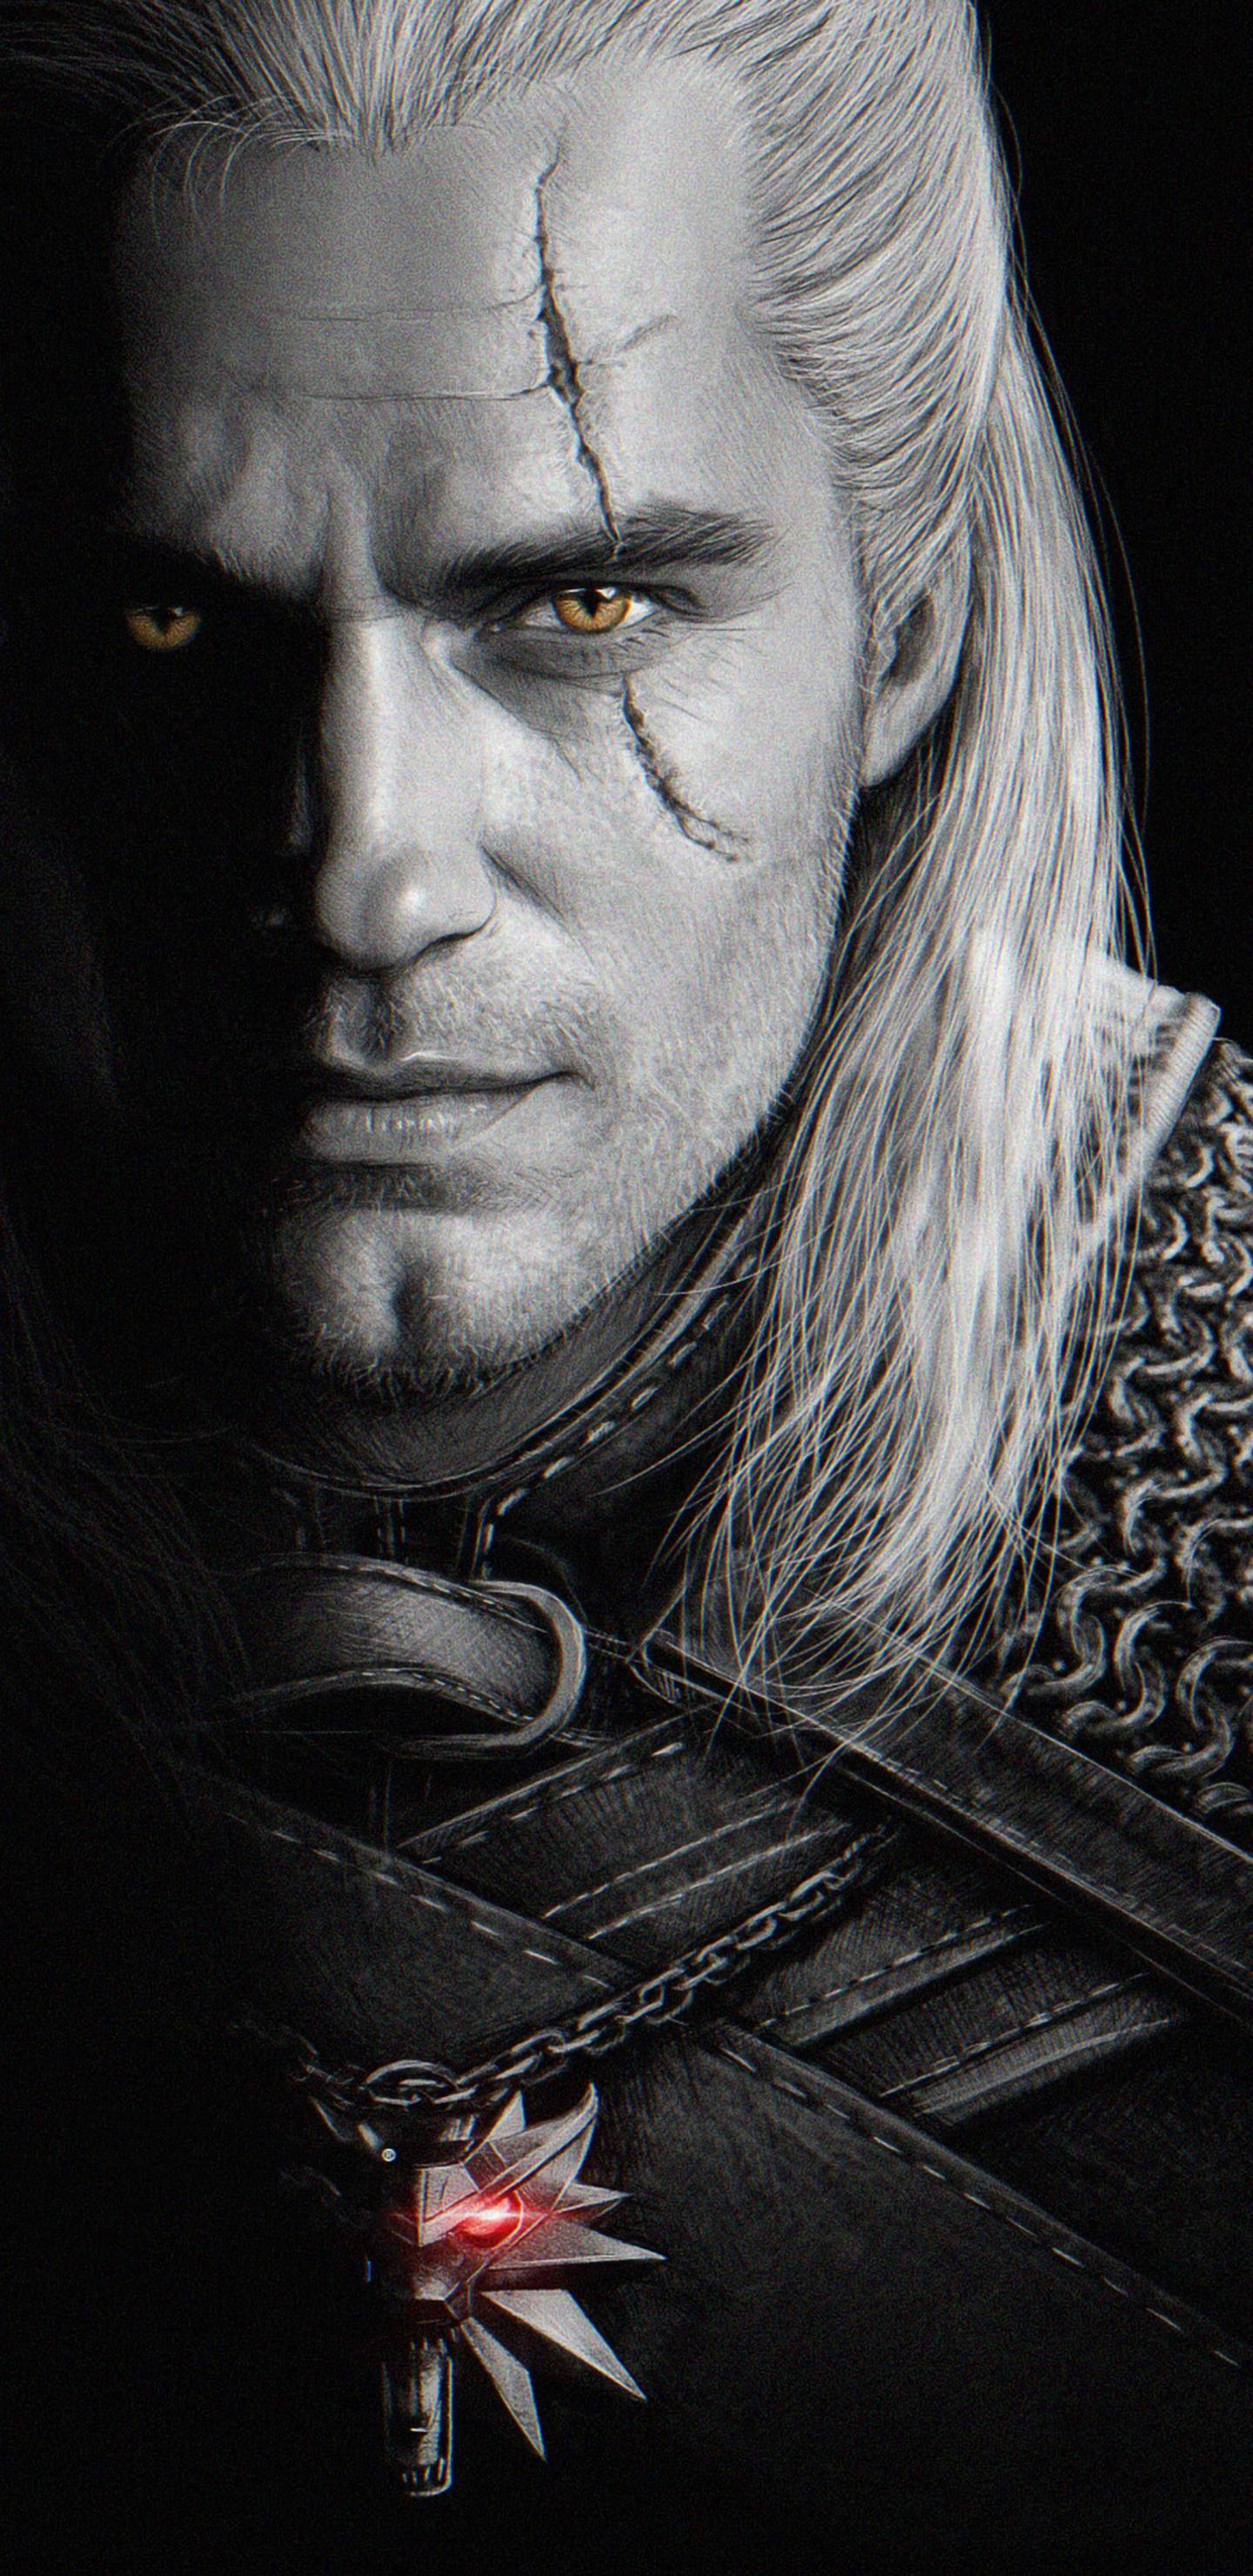 The Witcher wallpapers. Anyone exciting for the show?